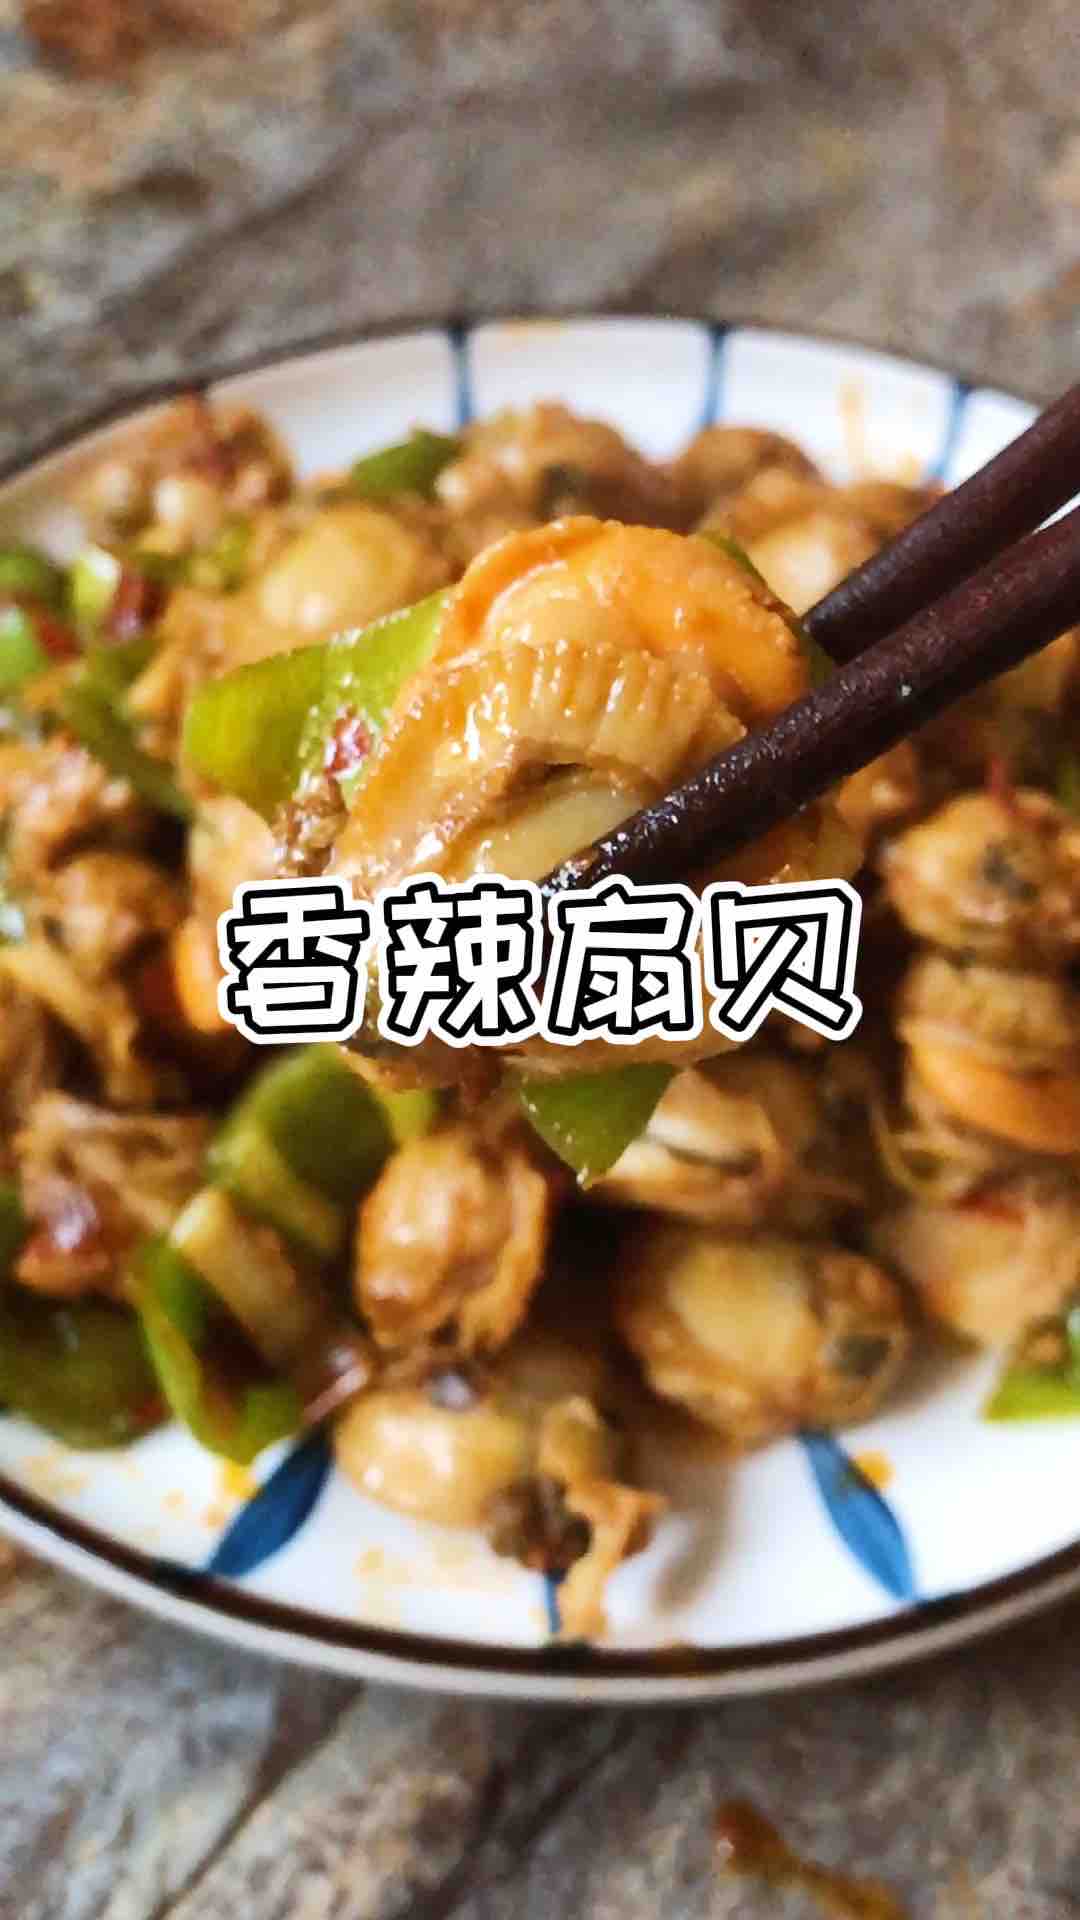 Spicy Scallop Meat recipe